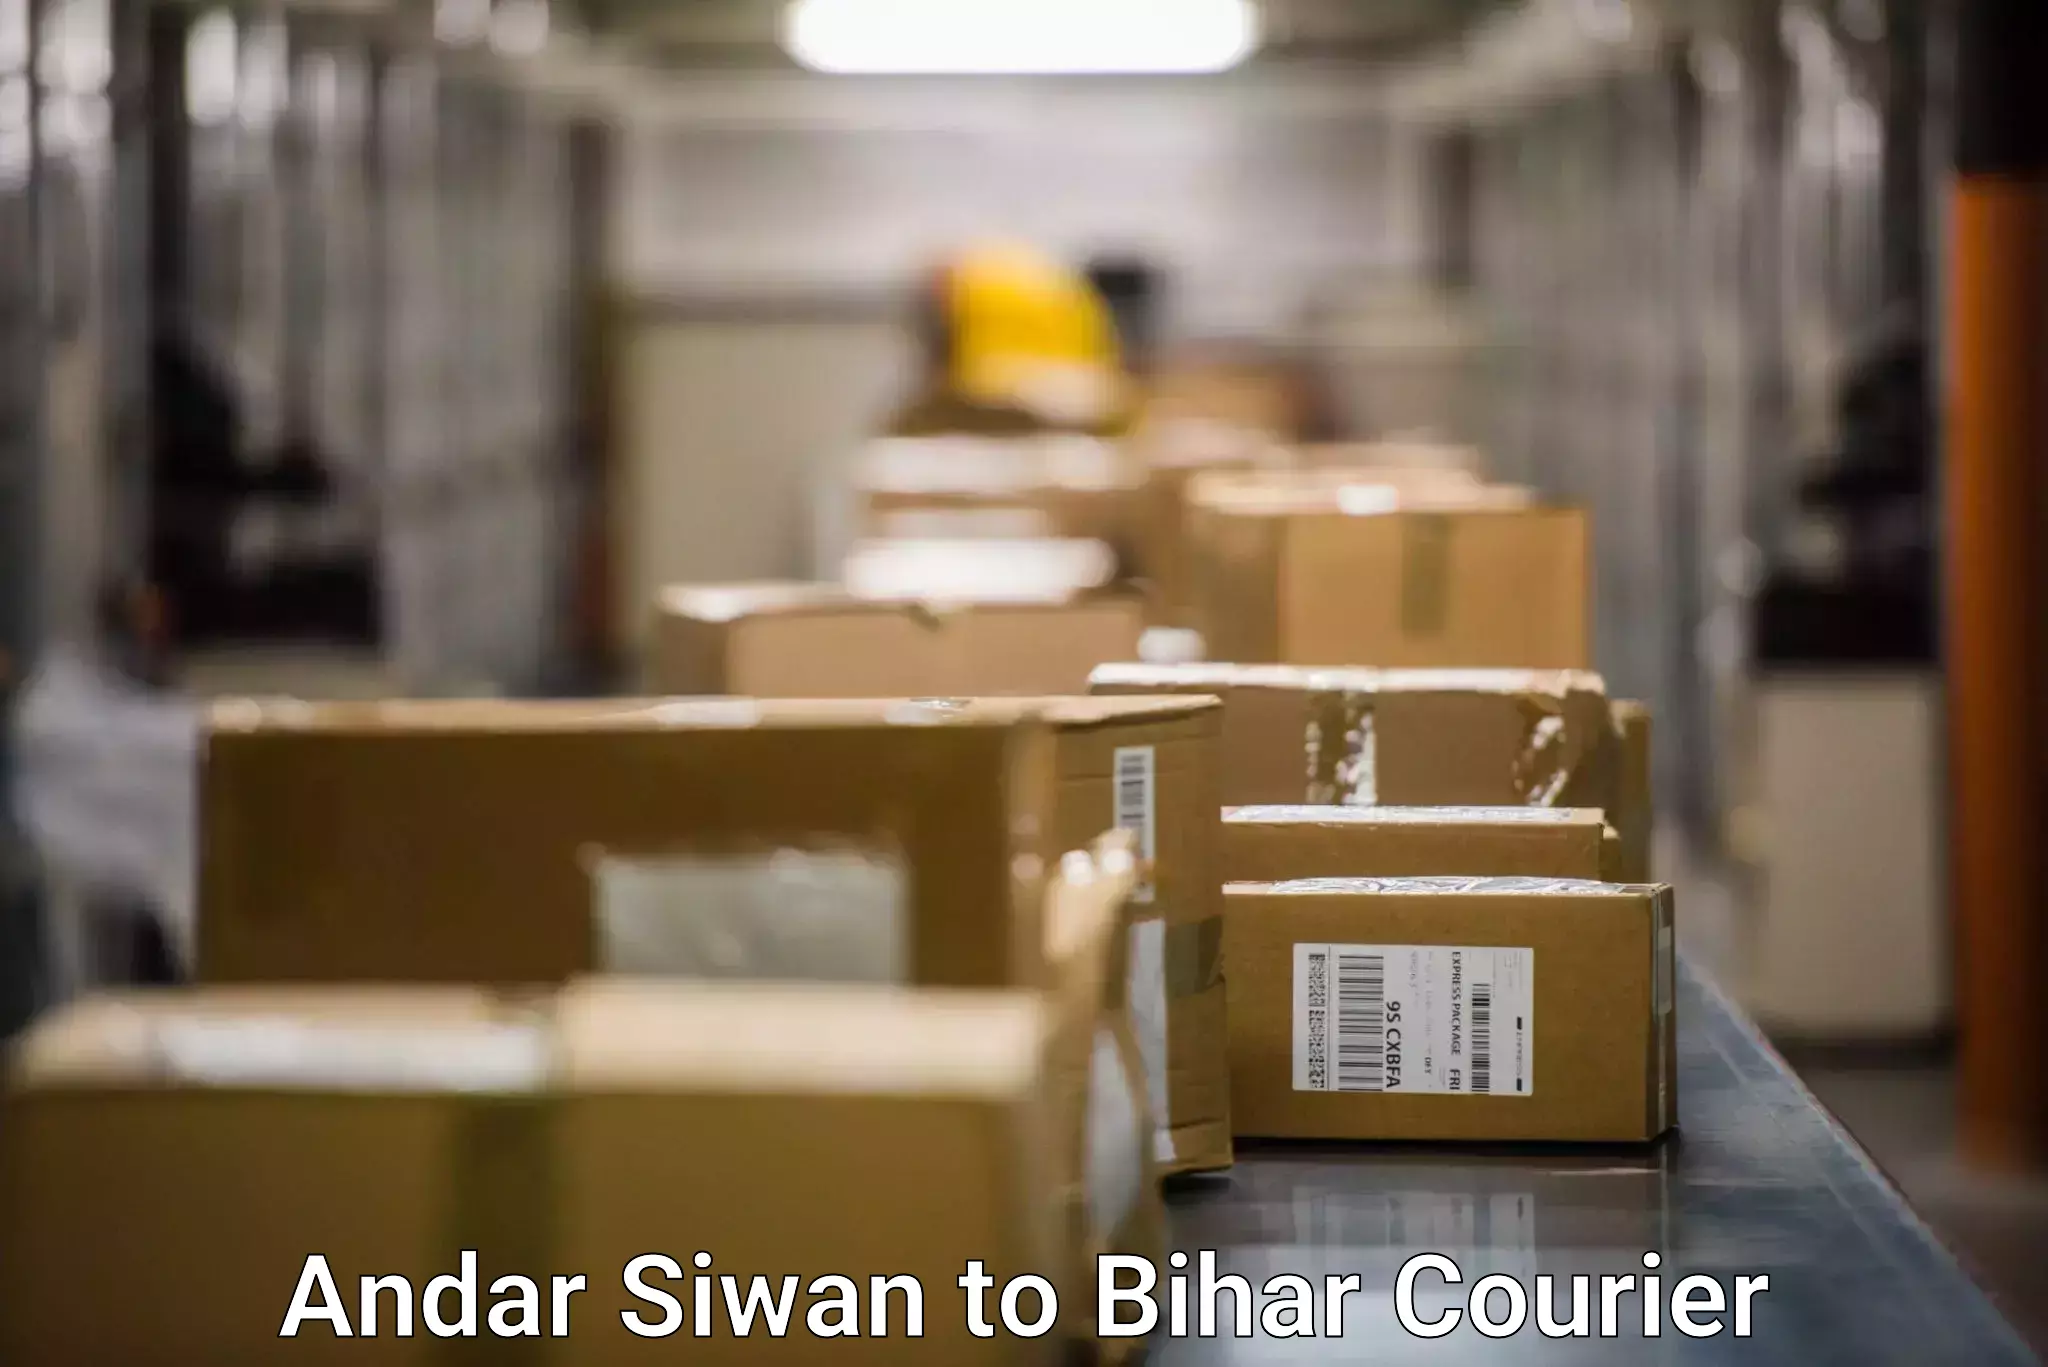 24-hour courier service Andar Siwan to Maheshkhunt